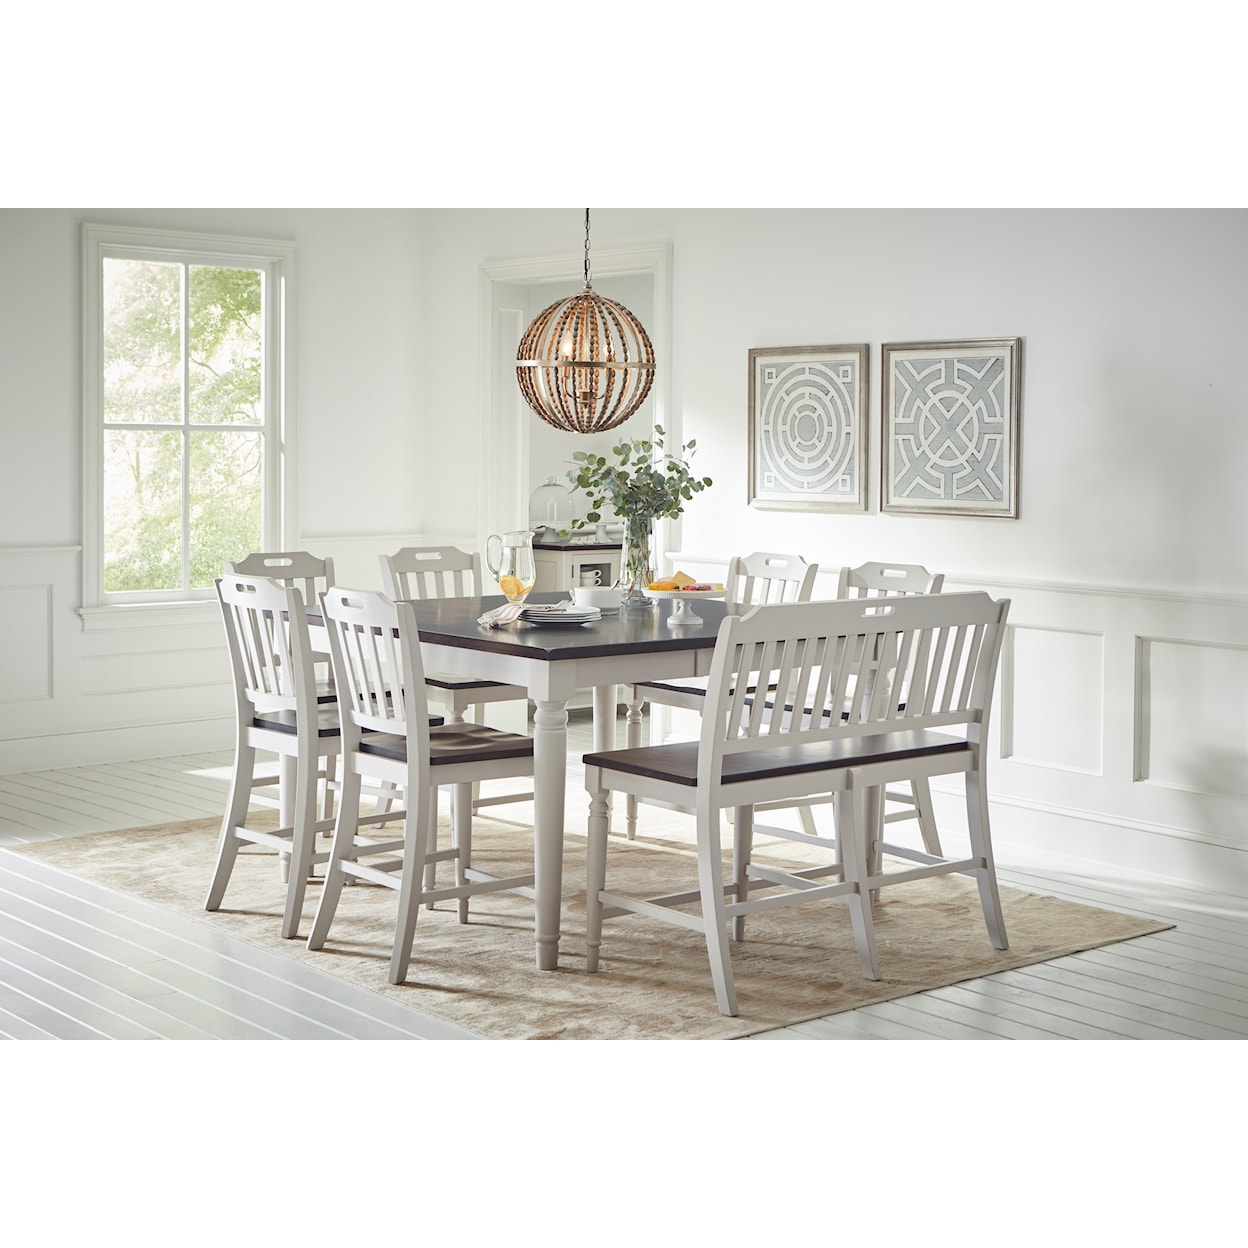 Jofran Orchard Park Counter Height Table w/ 6 Chairs & Bench